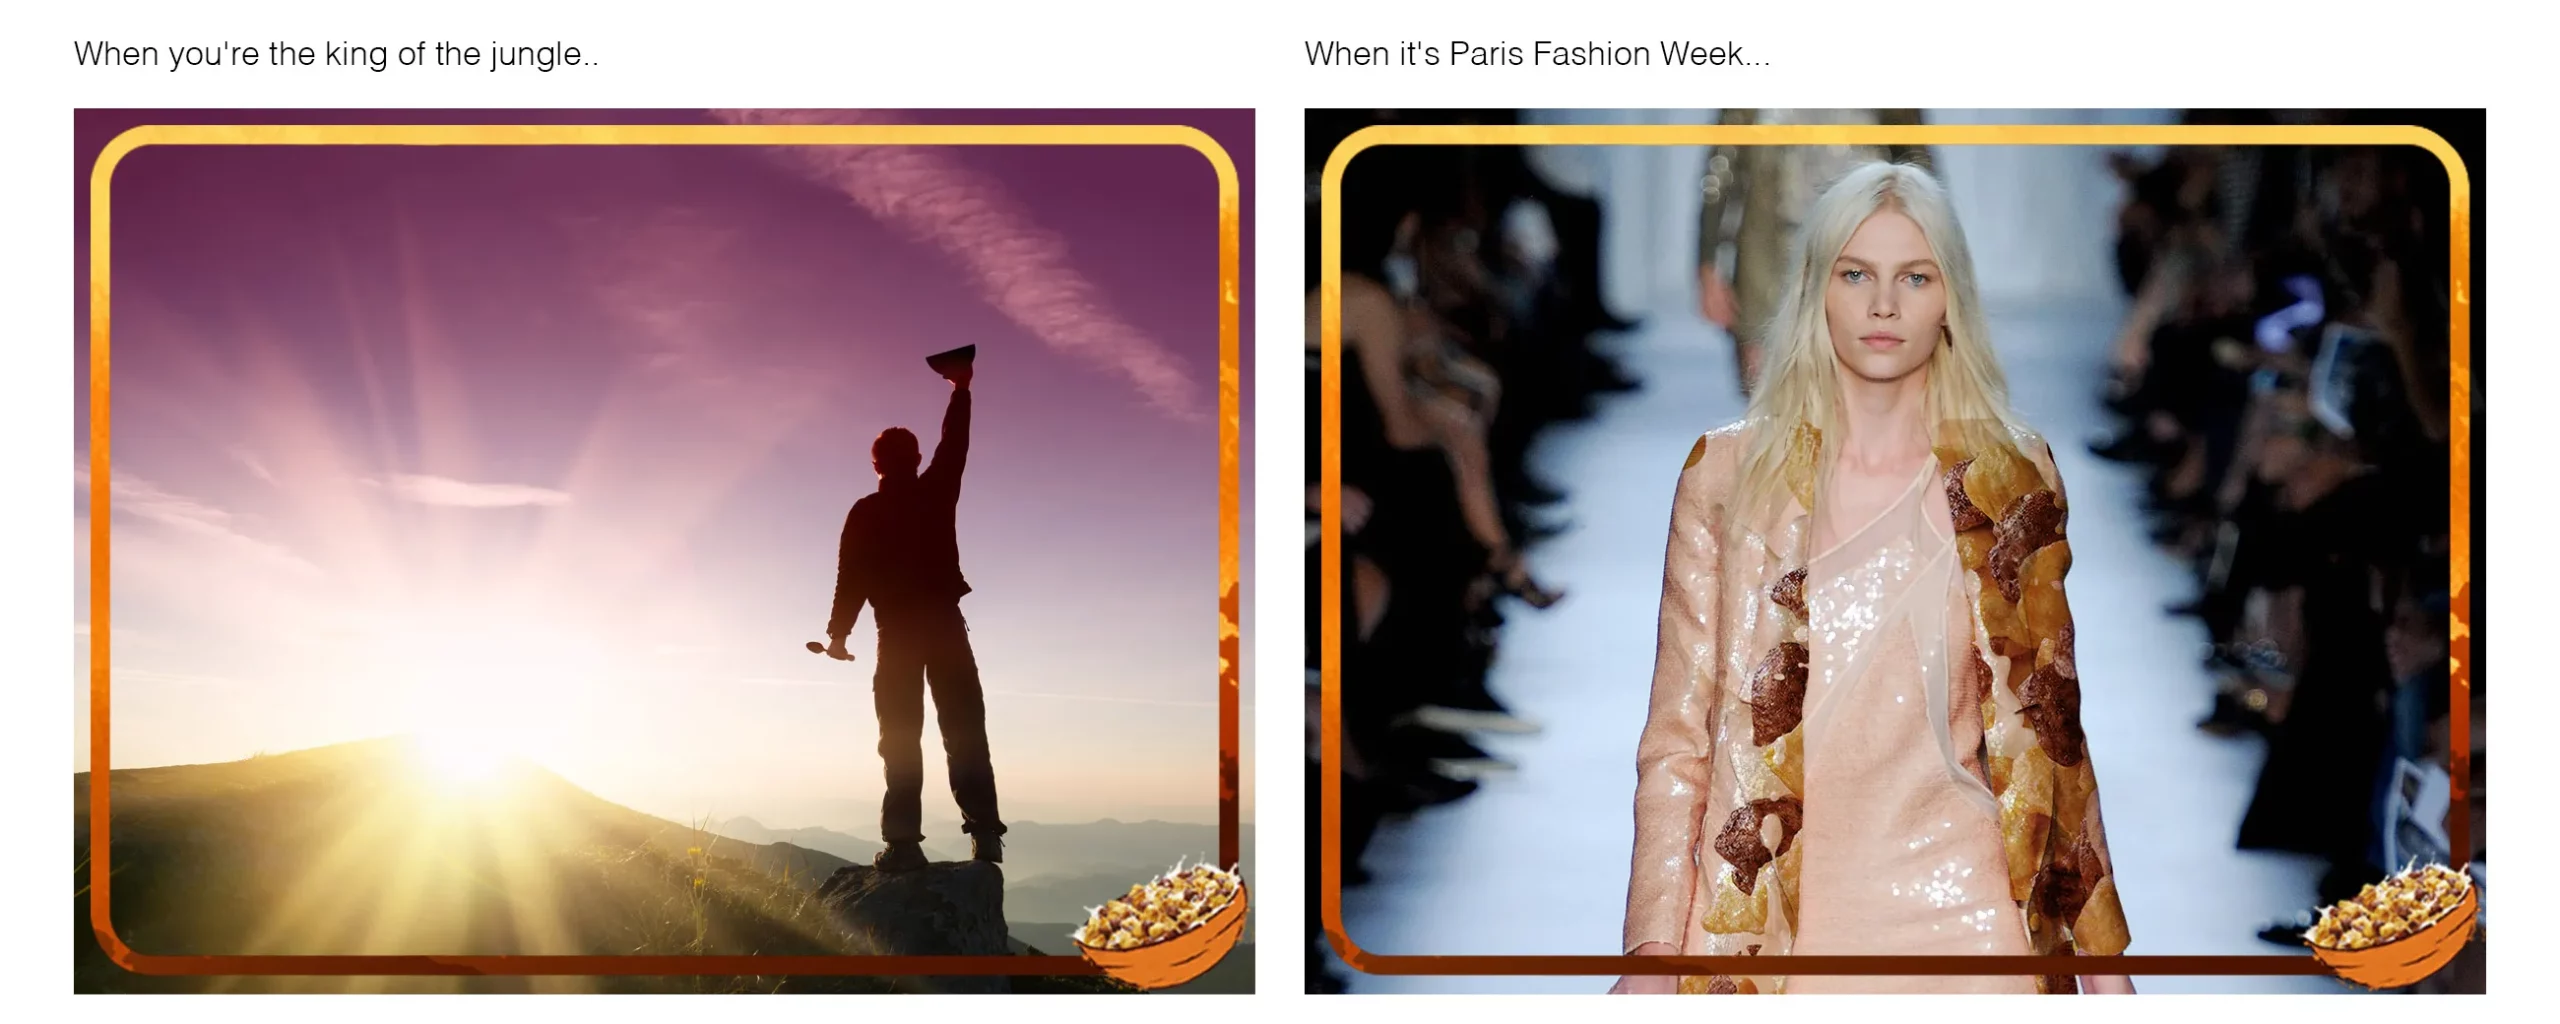 Facebook and Instagram posts for Nestlé Lion with king of the jungle and Paris fashion week themes